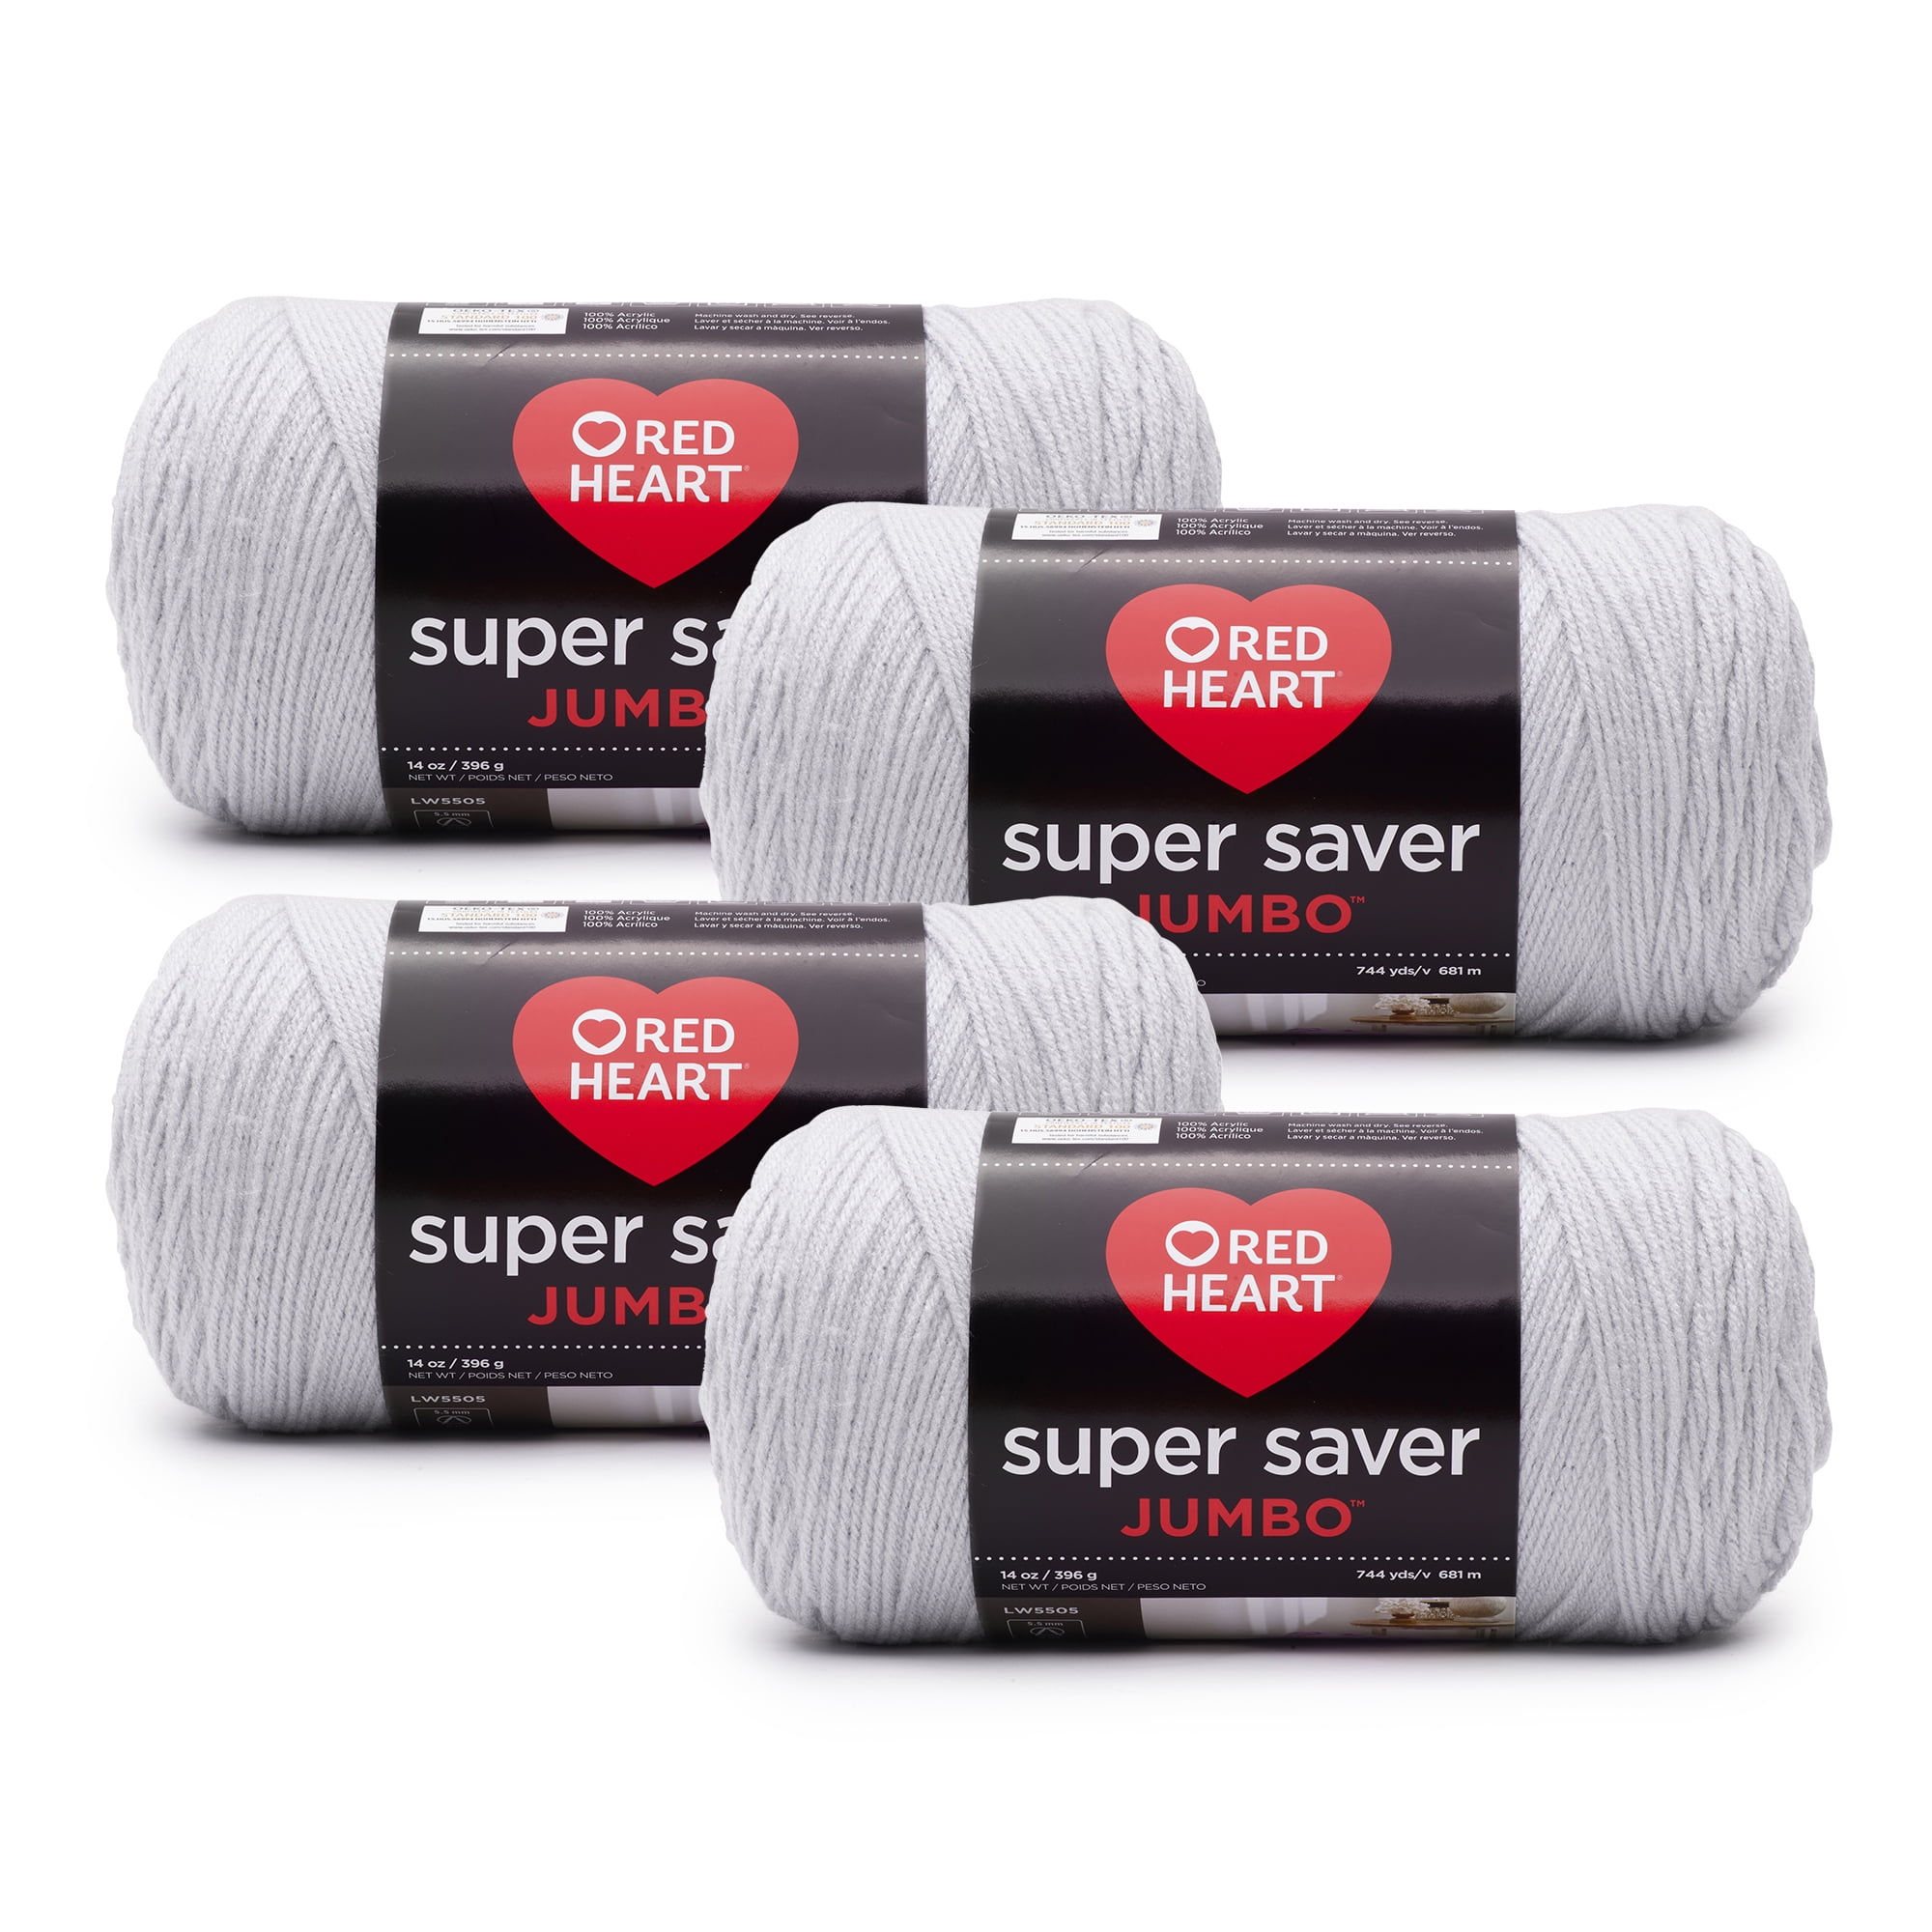 Red Heart Super Saver 100% Acrylic Yarn- 8 Oz.~ YOU CHOOSE FROM